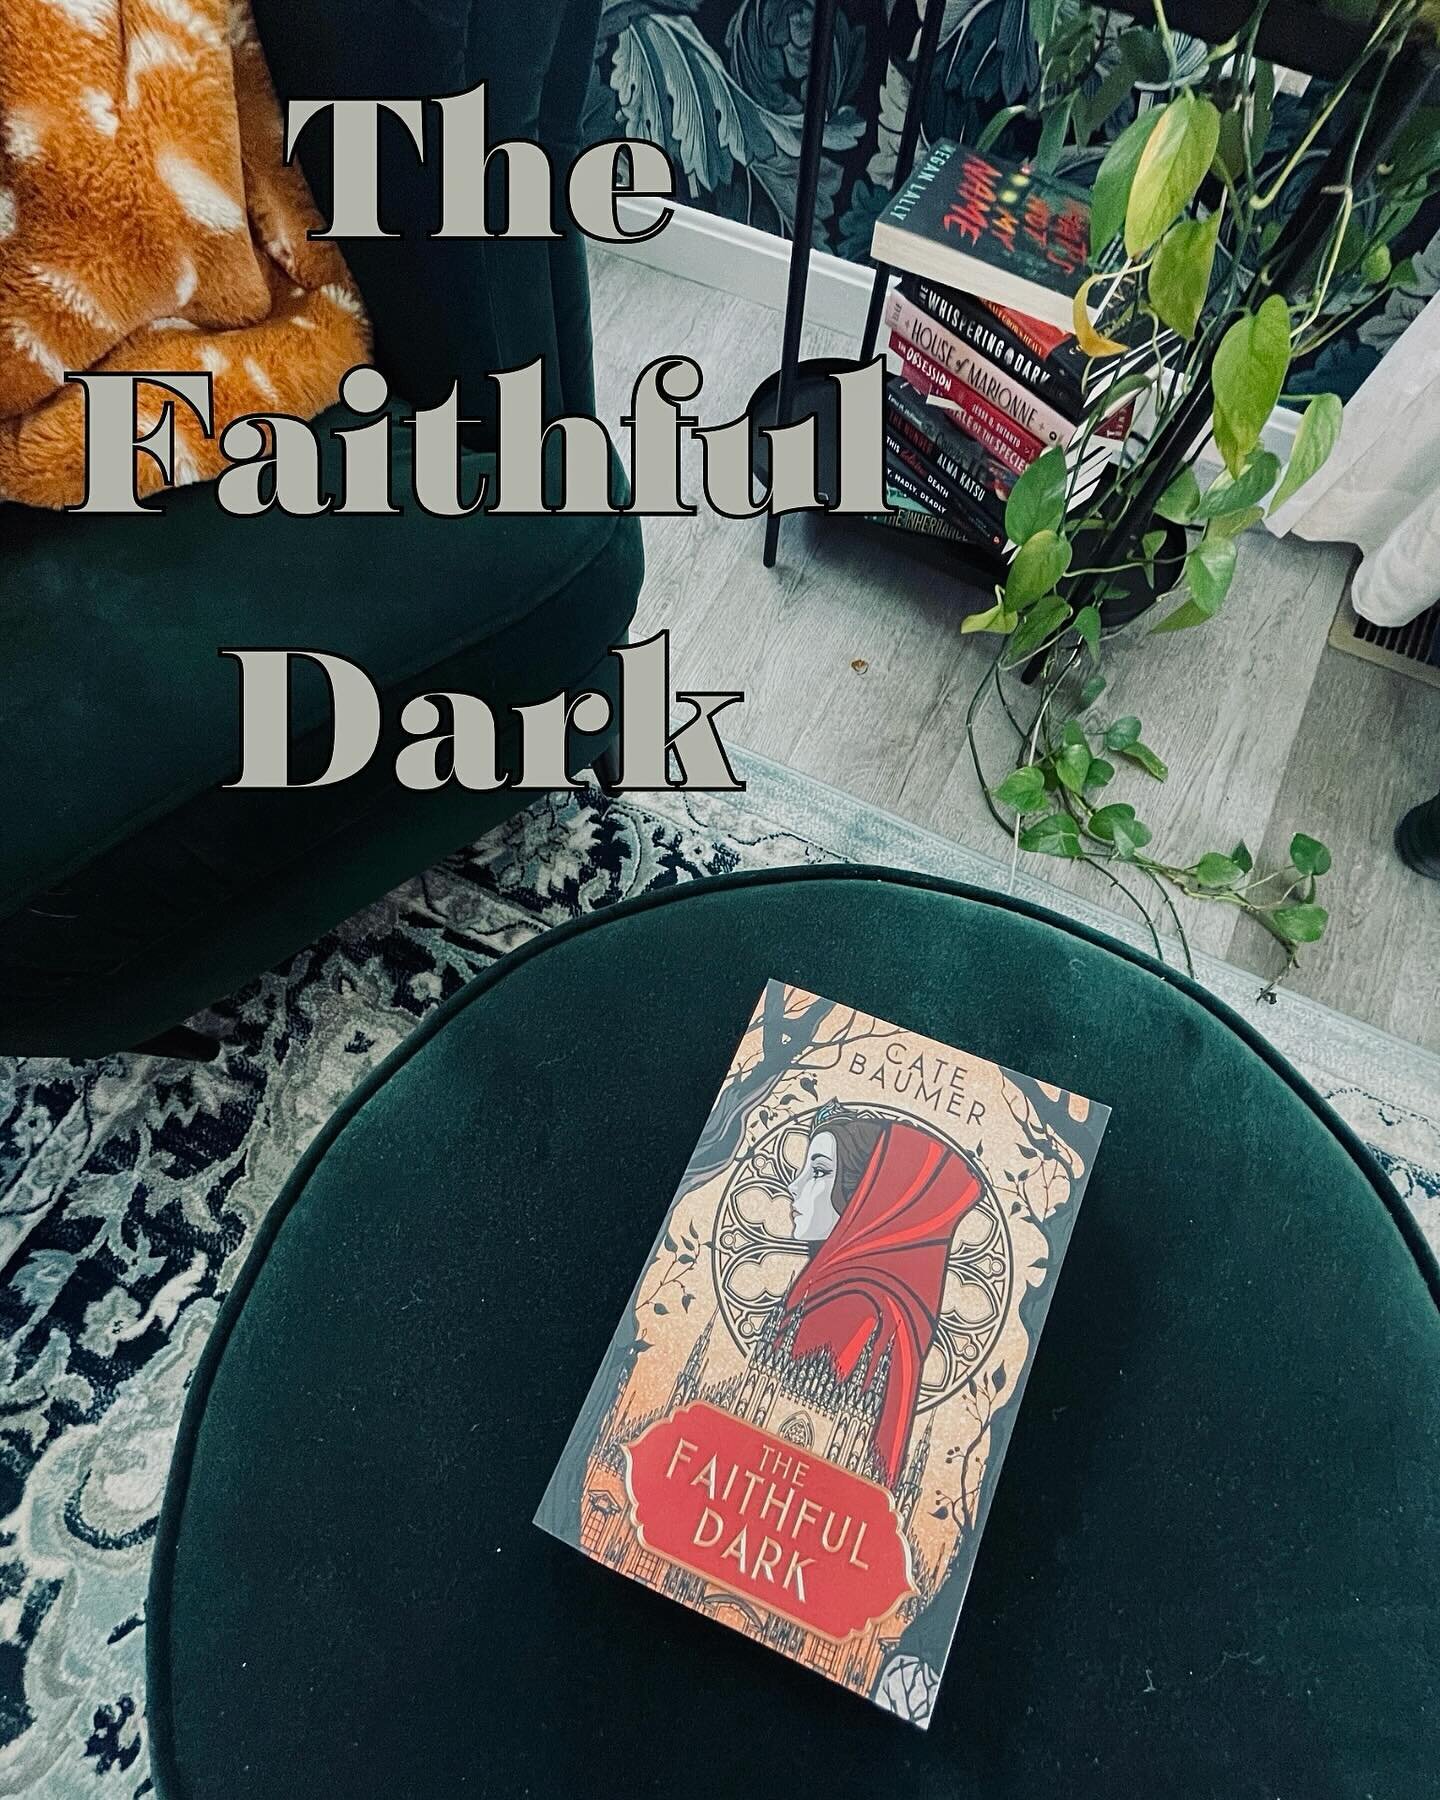 Happy belated book birthday to @cate_baumer and #TheFaithfulDark 🖤🖤 I absolutely loved this romantic fantasy with a dark serial killer mystery and a MOST EXCELLENT antihero POV (✨Ilan, you darling boy✨)

Plzzzzz go read this asap so we can talk abo